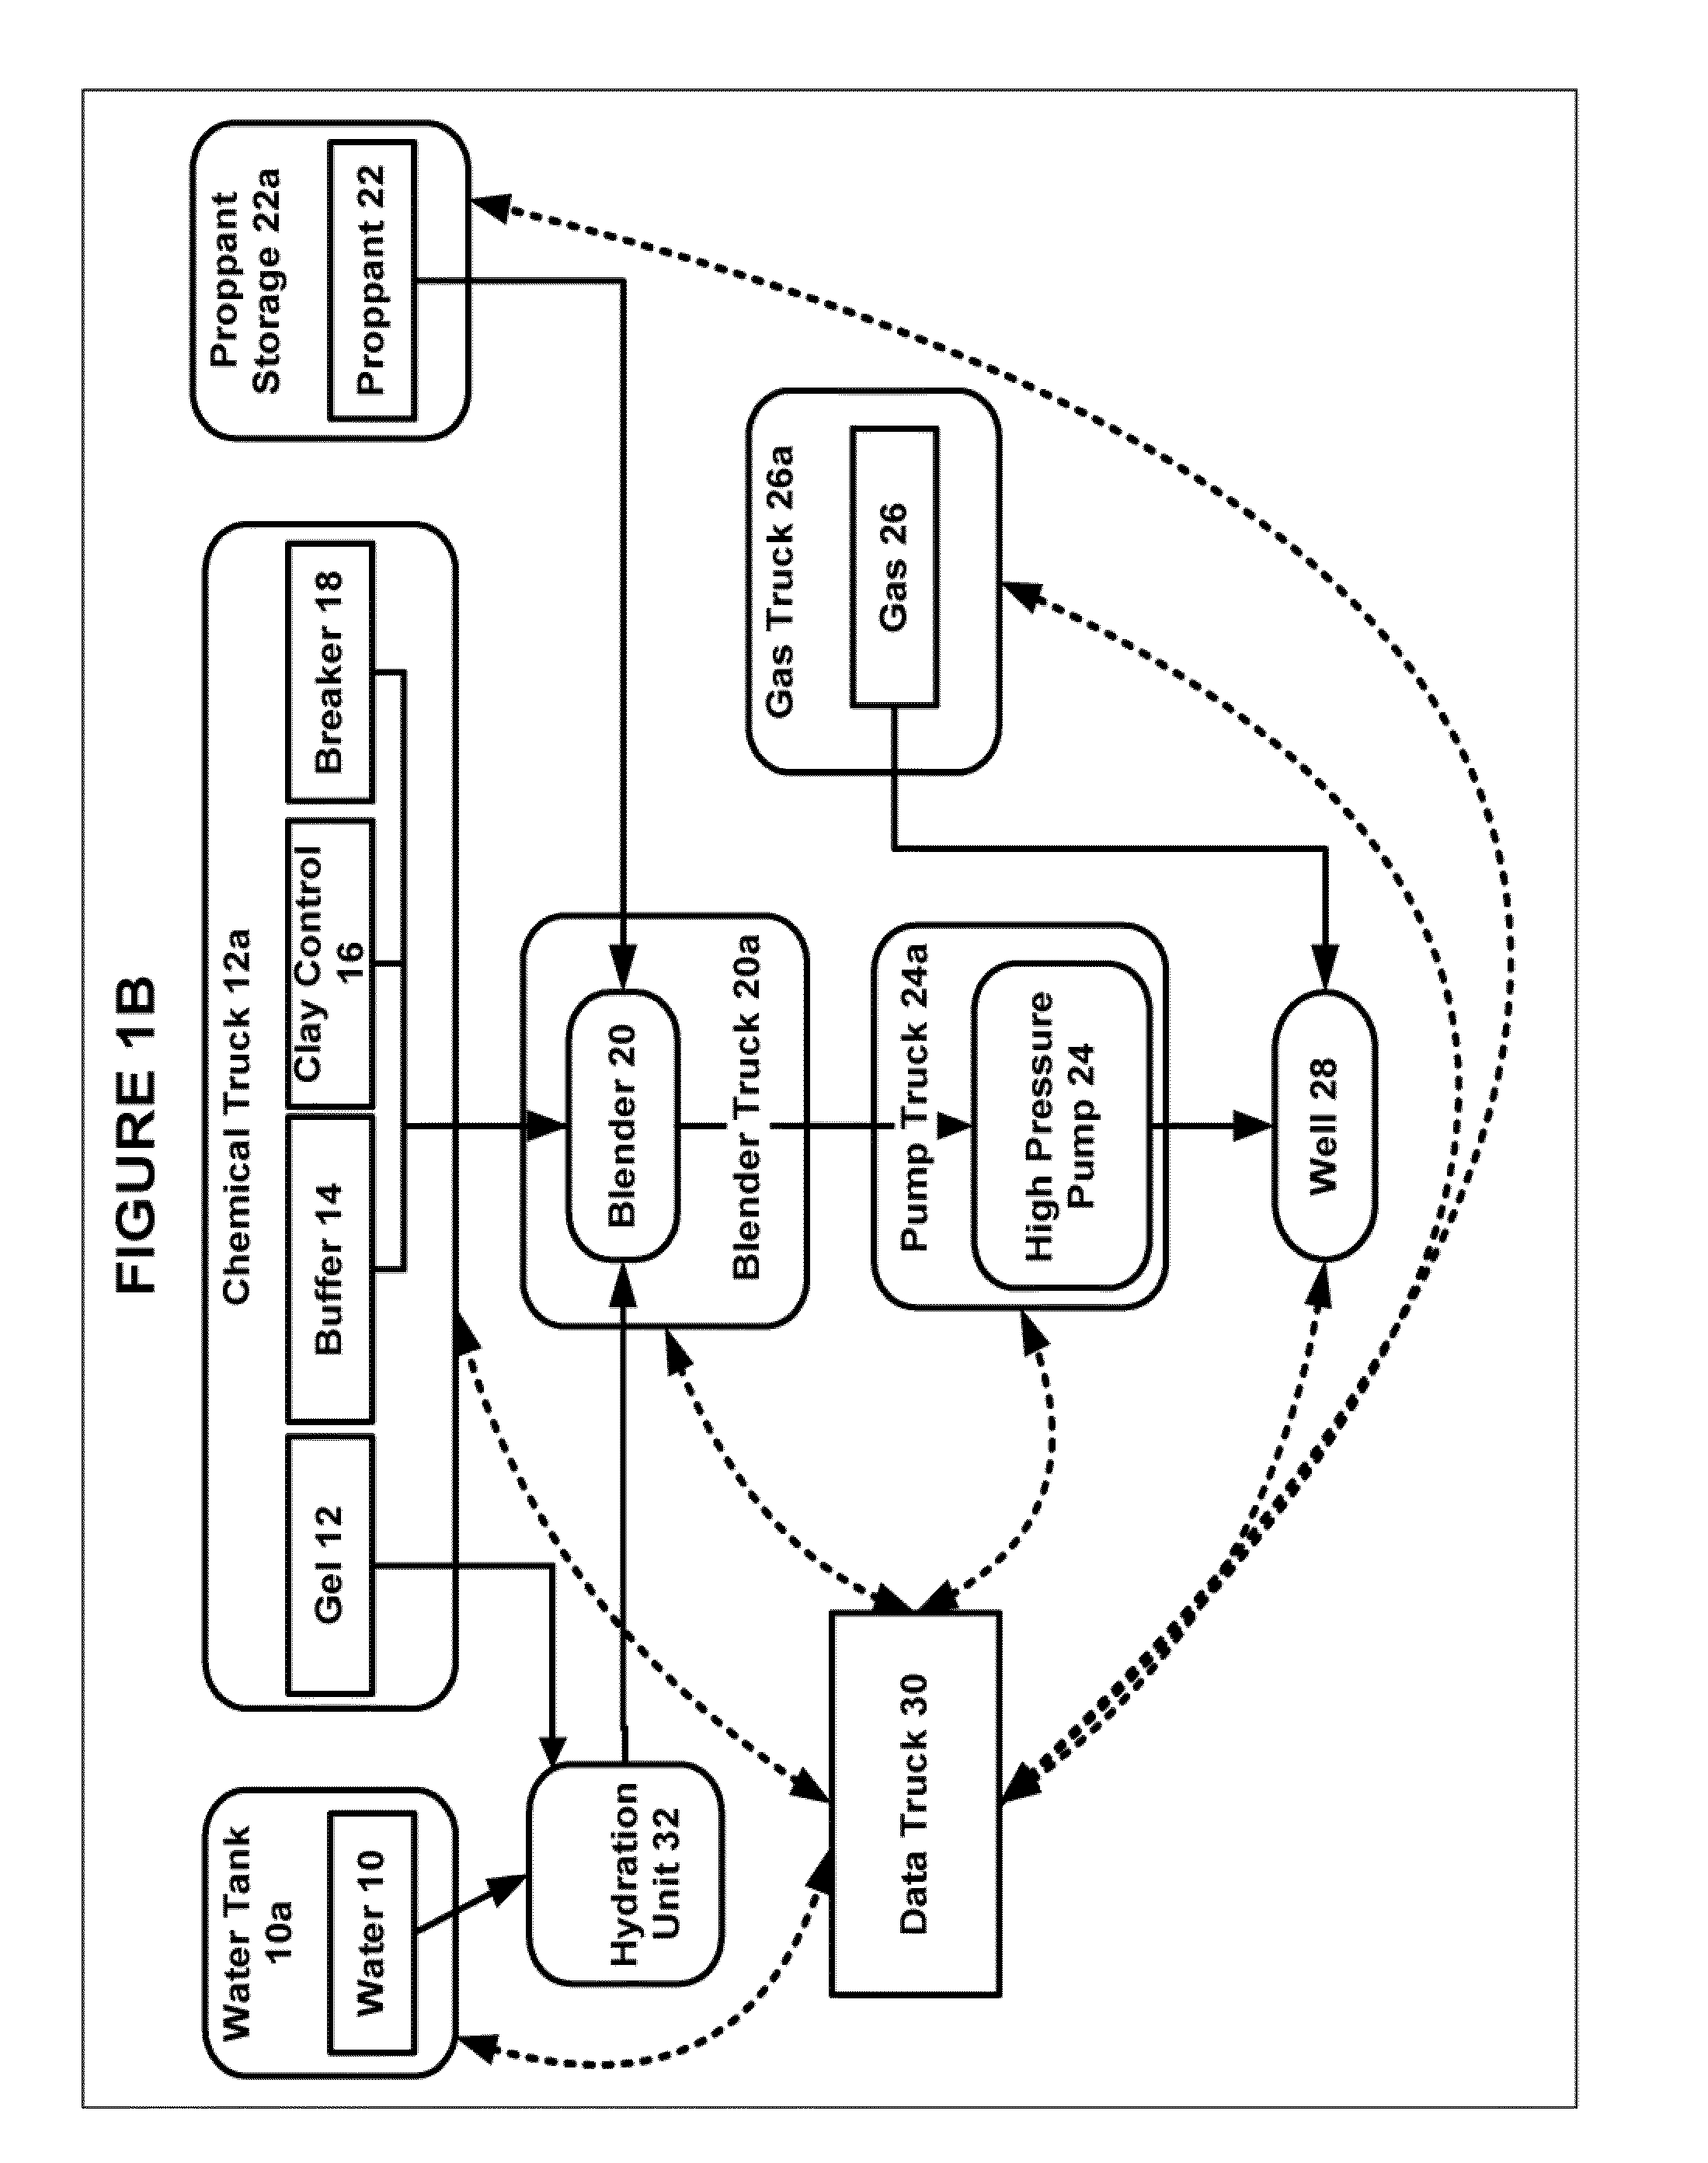 Green coal bed methane fracturing fluid compositions, methods of preparation and methods of use